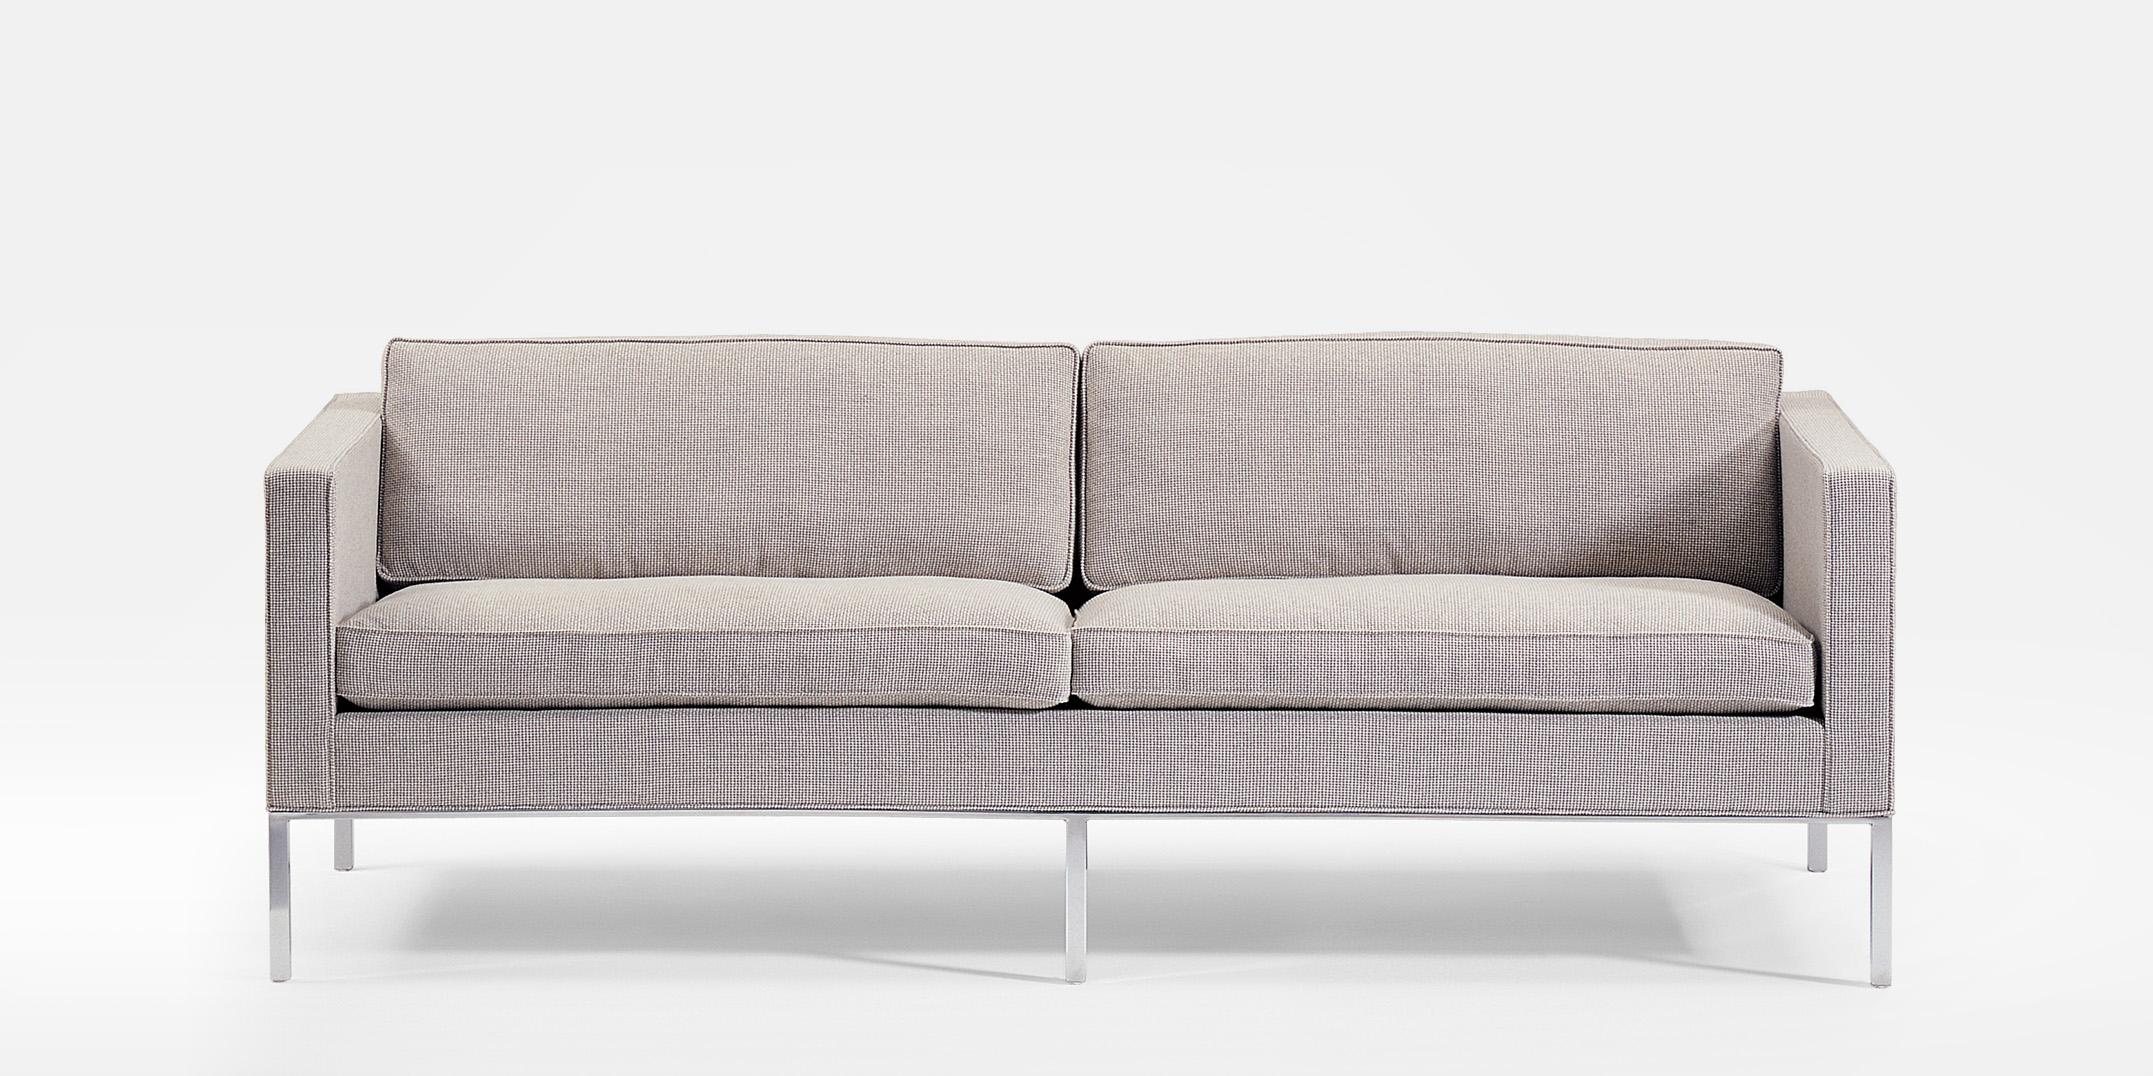 This design, dating from 1964, is still up to date. As slim and tender as your first love. A Classic that is now in production for its second time. Now available as contract seating for executive areas and lounges or as a defining statement in